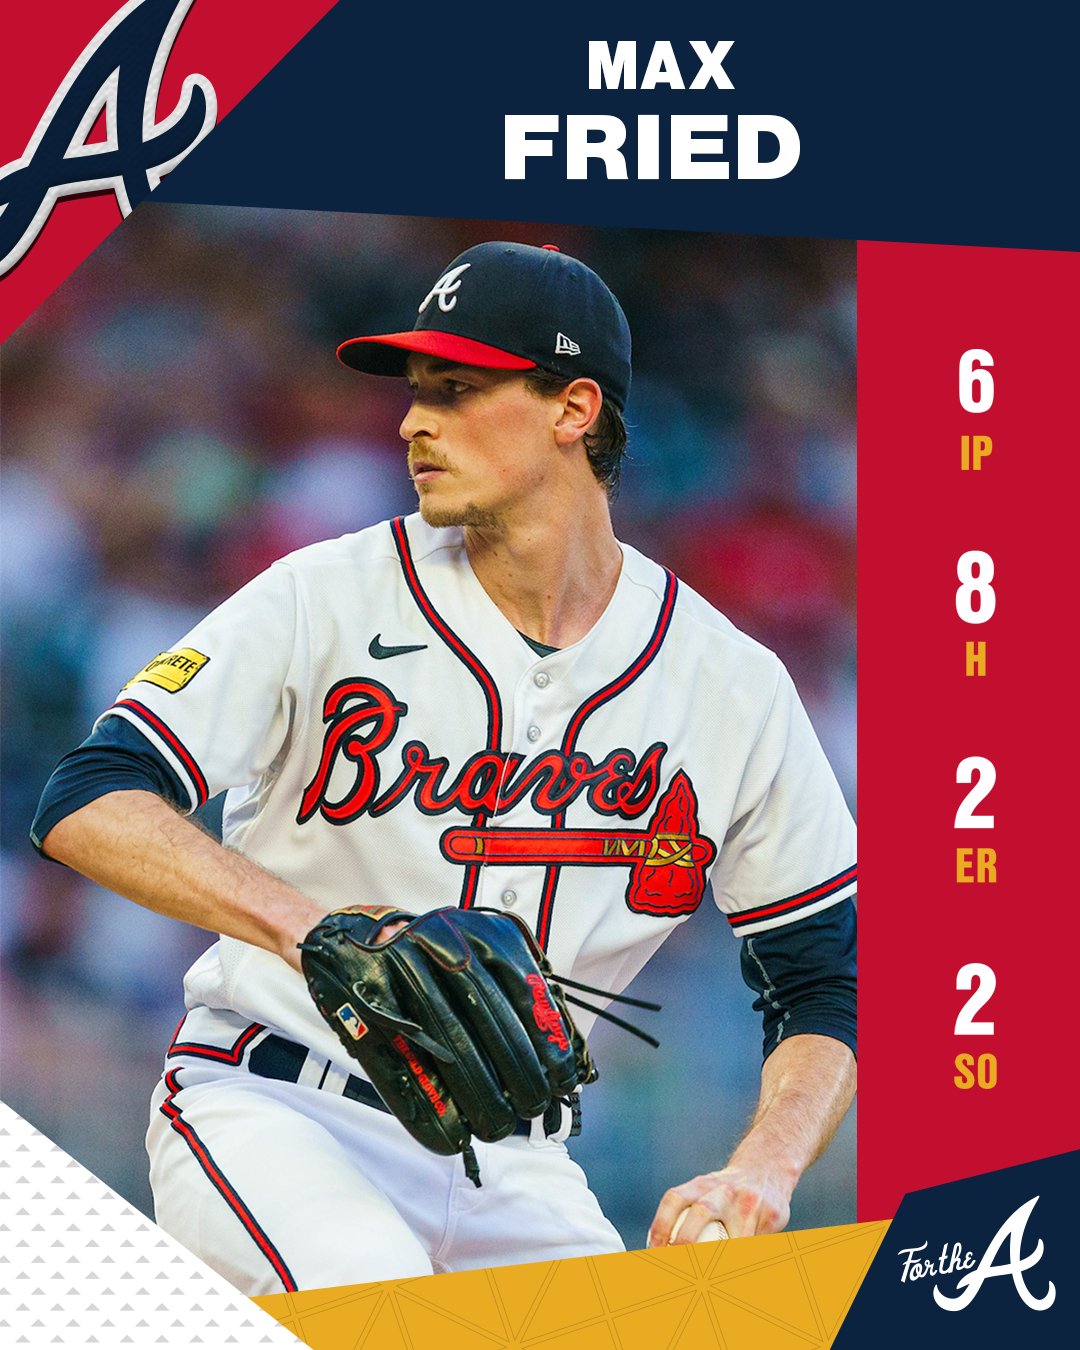 Atlanta Braves on X: What a night! #ForTheA